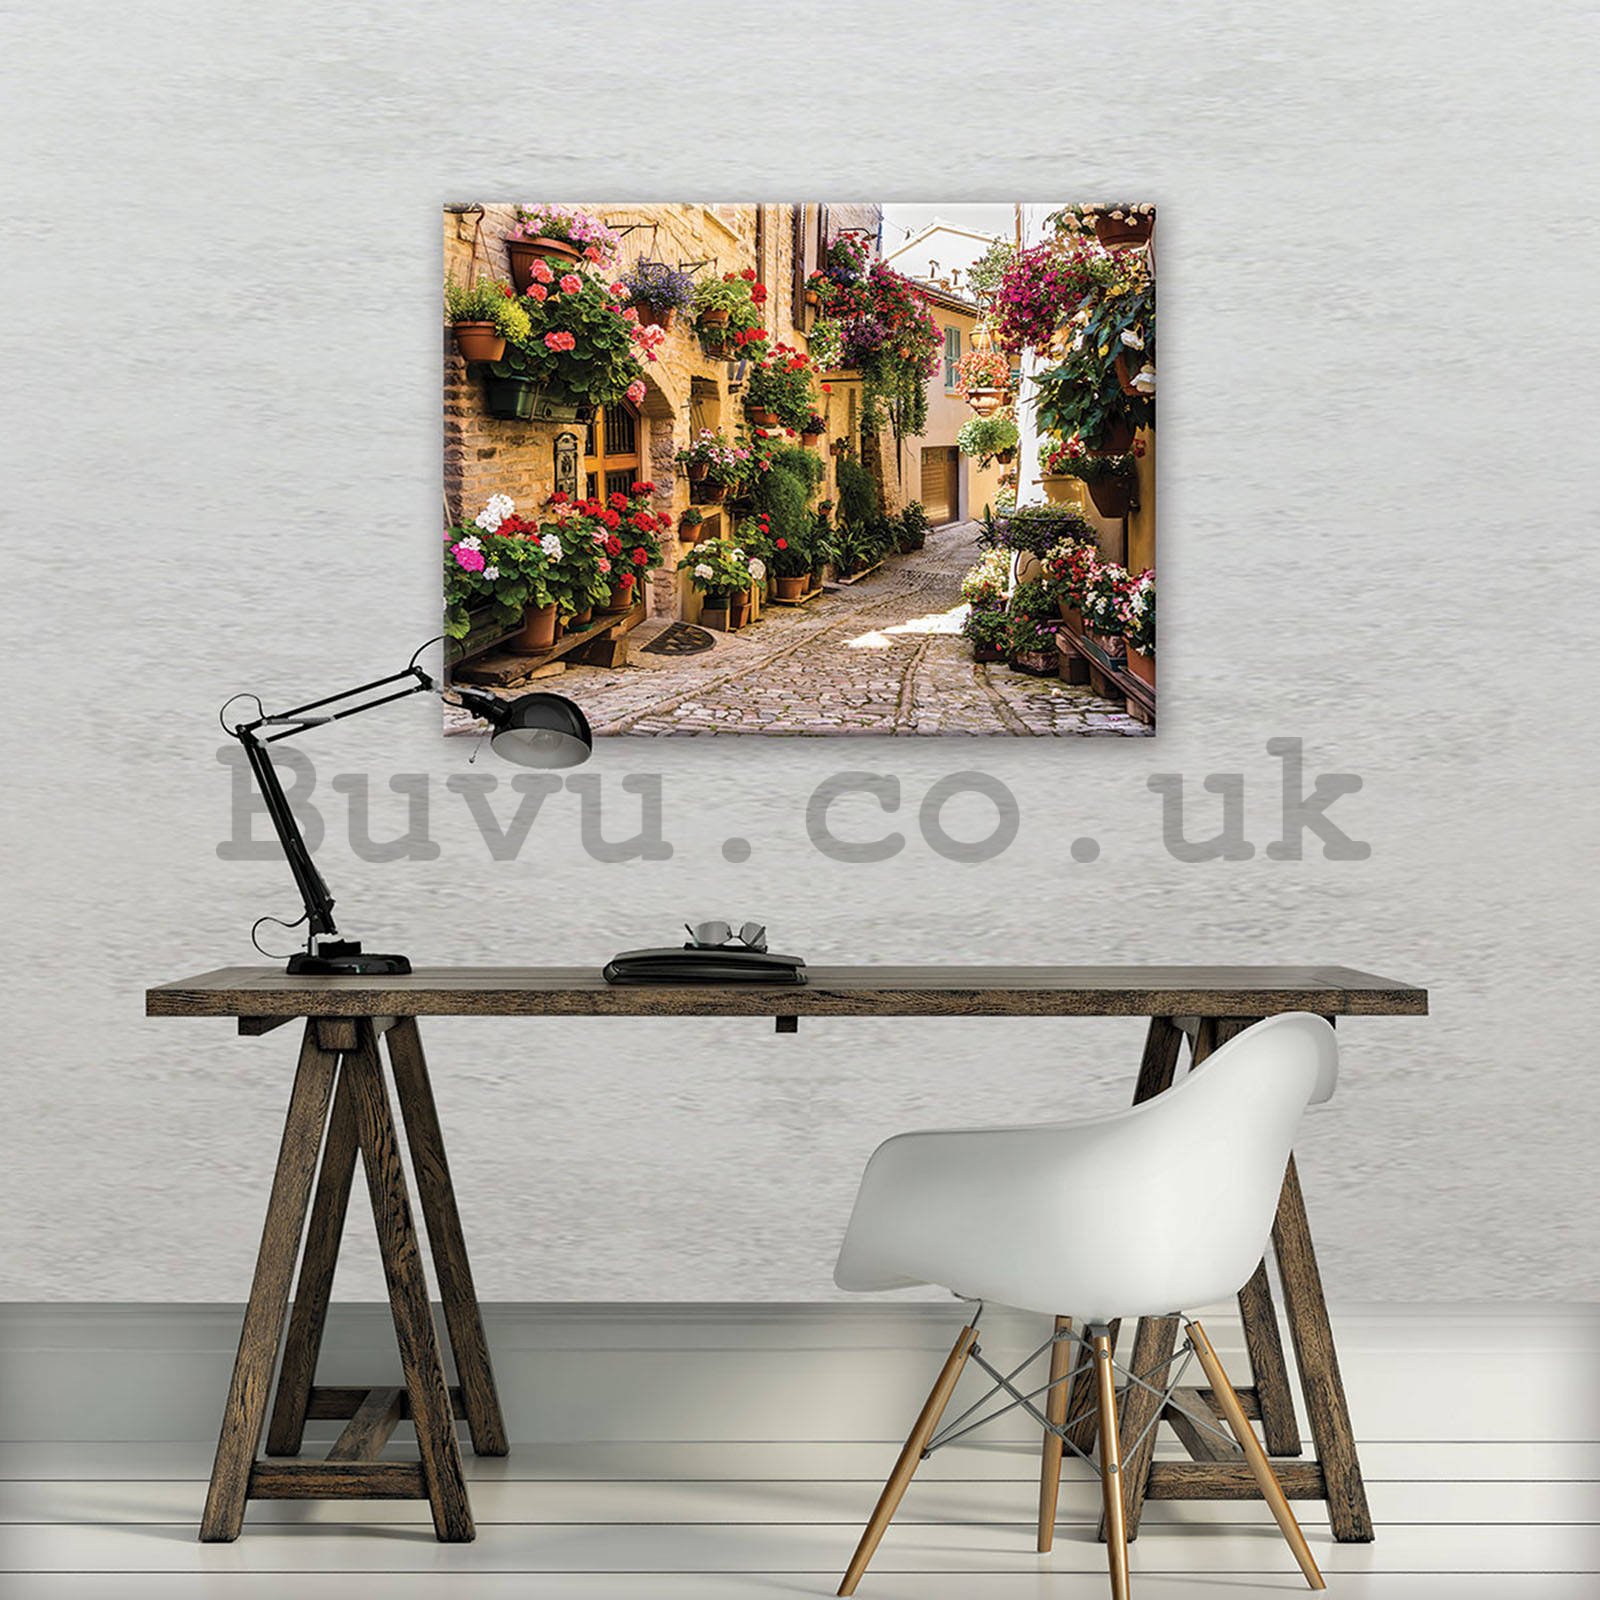 Painting on canvas: Street with flowers - 80x60 cm